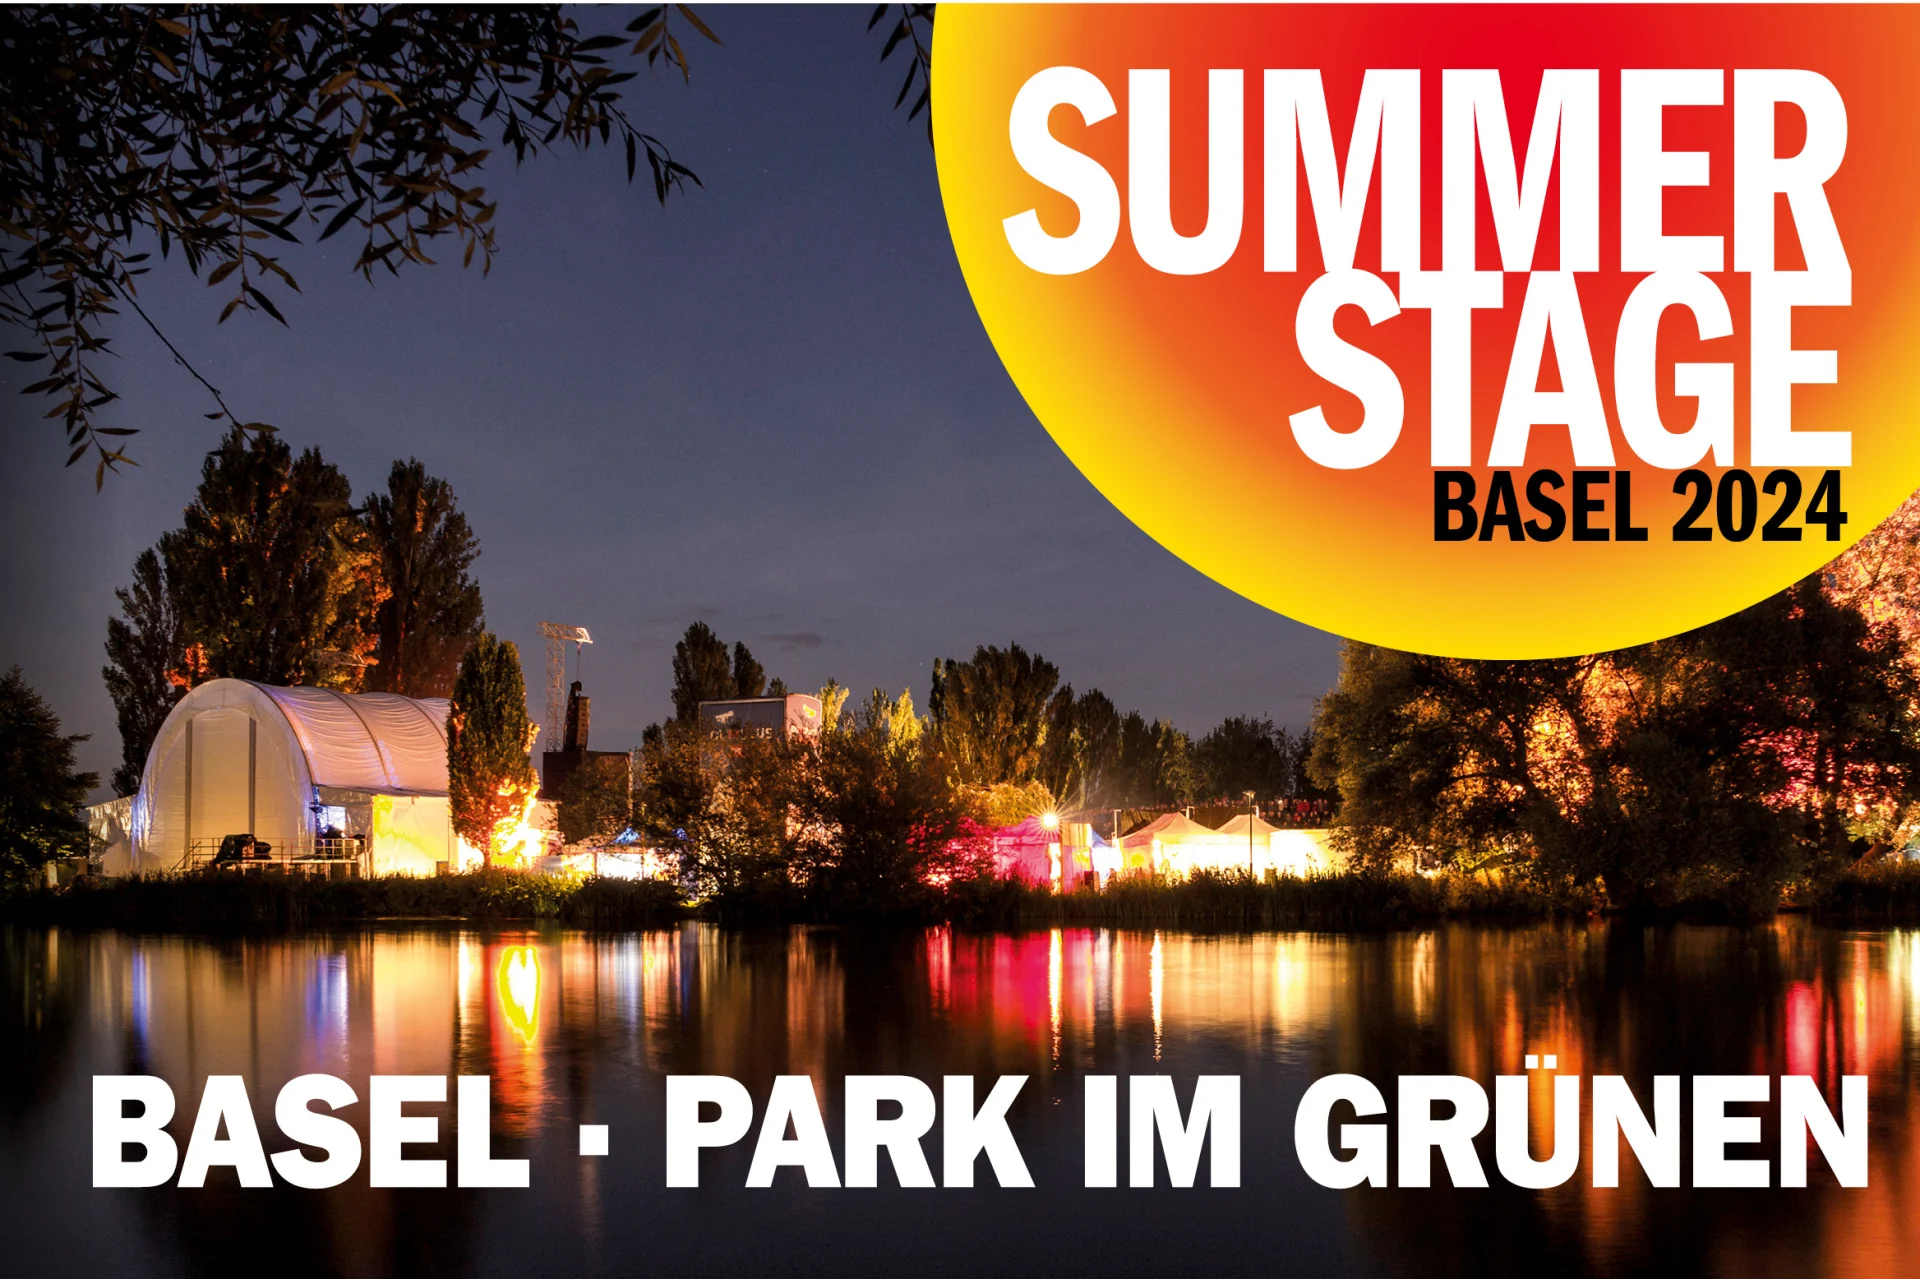 SummerStage Basel: Evening festival atmosphere by the river